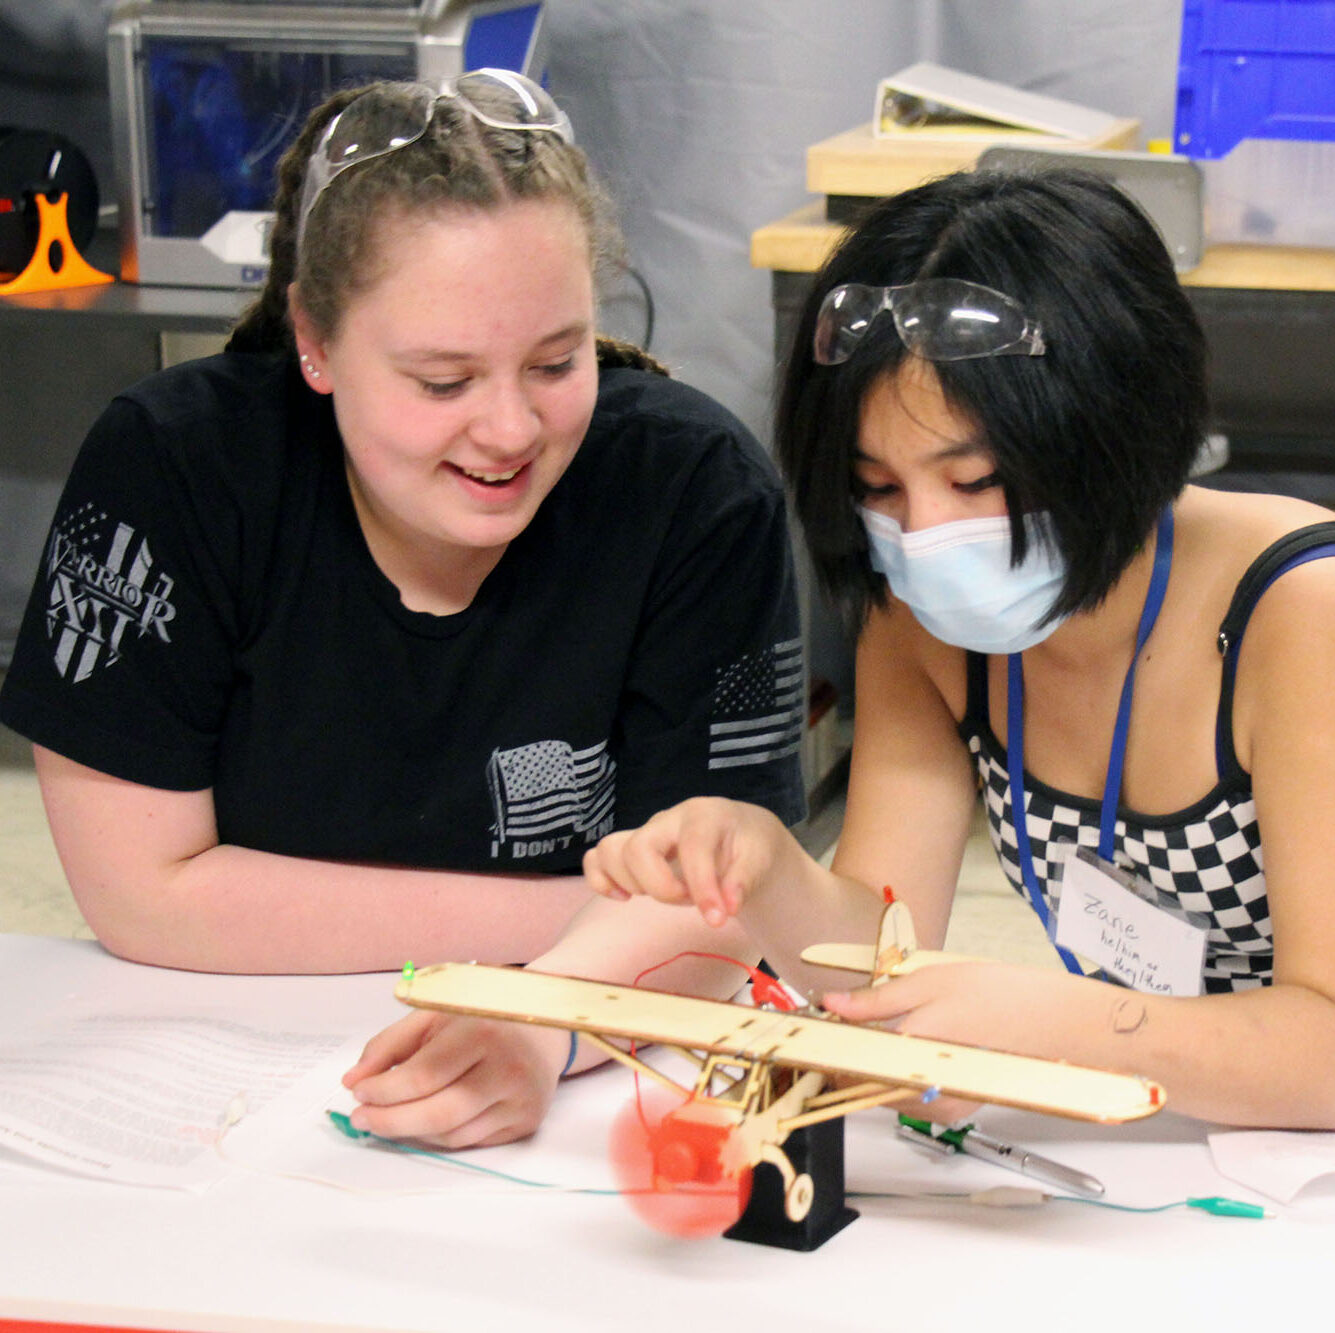 Middle school girls use wires and circuits to make a propeller run on a wooden model plane. Introducing girls to a variety of career opportunities is part of Vermont Works for Women's overall mission.